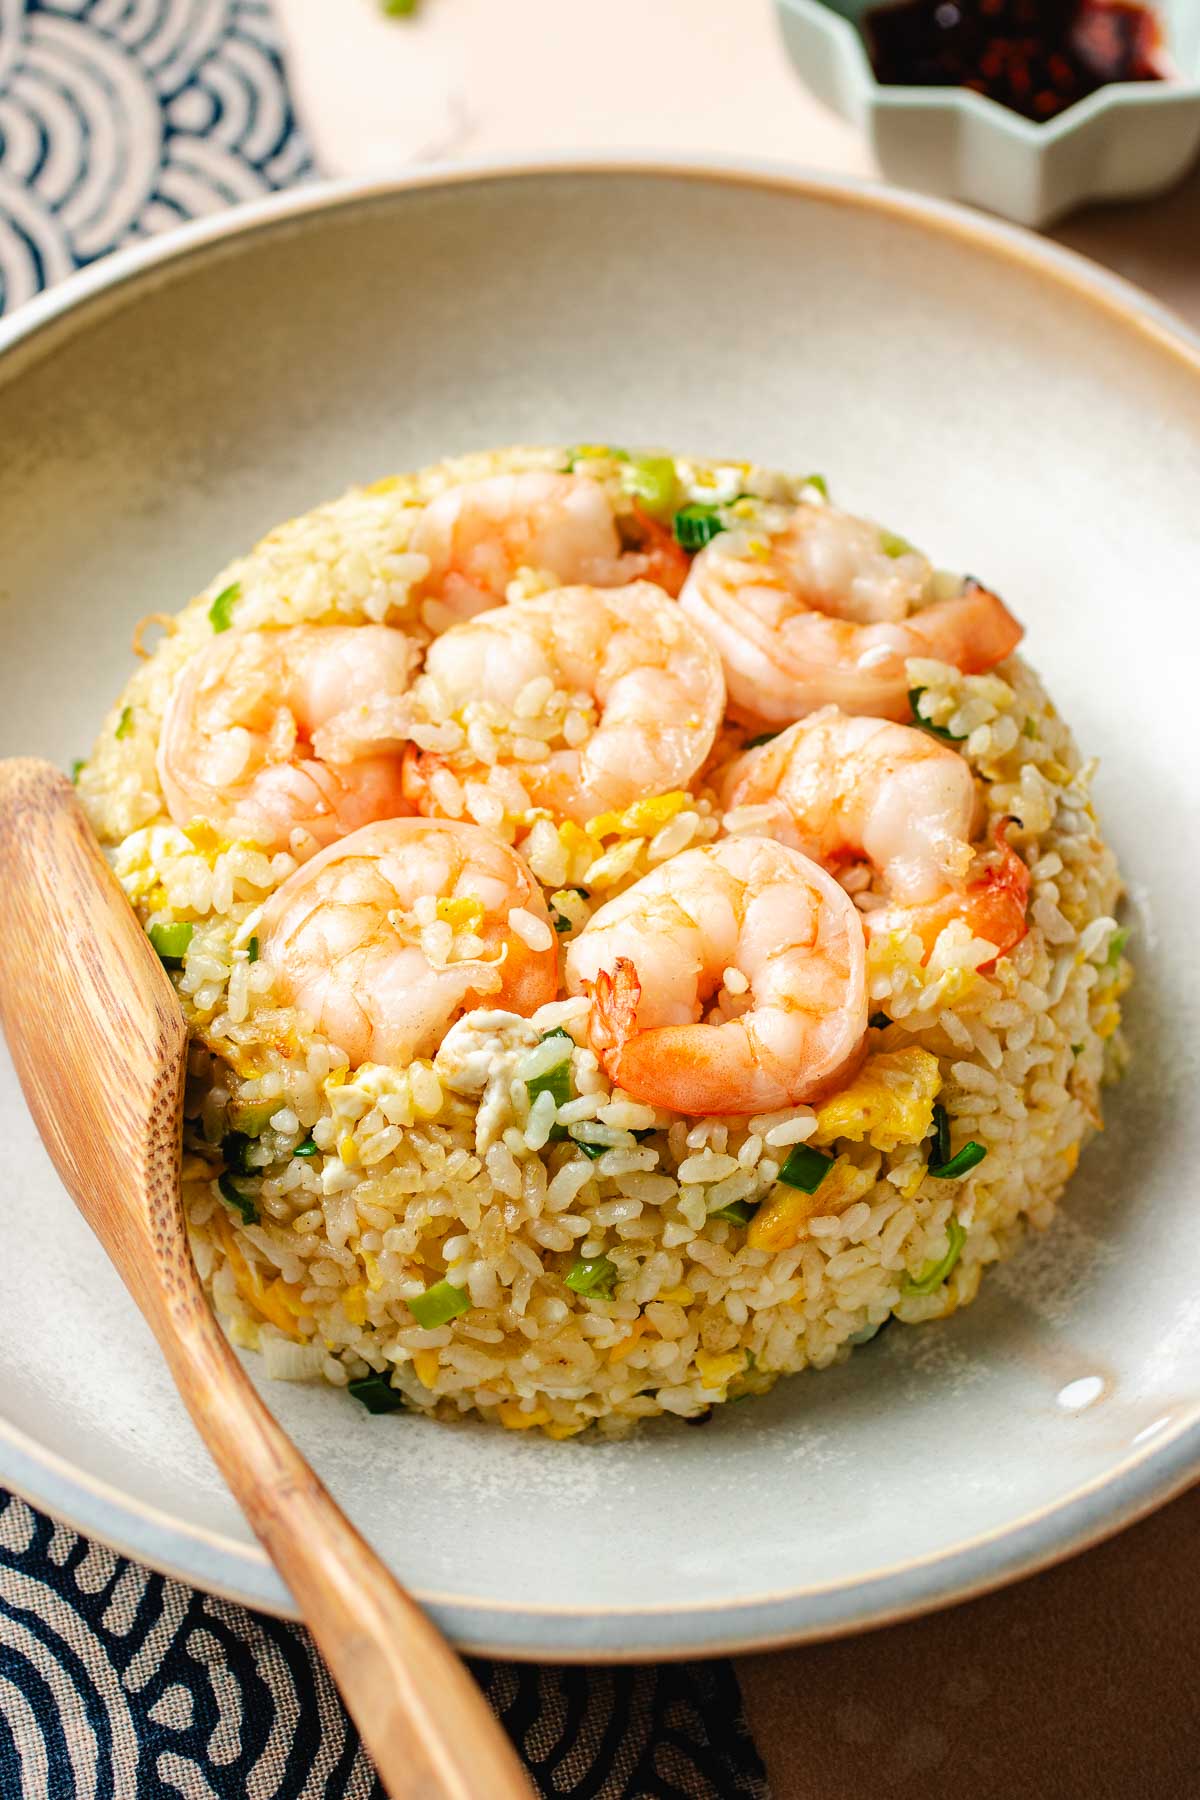 Image shows Din Tai Fung fried rice recipe with shrimp and eggs plated and served just like the restaurant's in a plate.